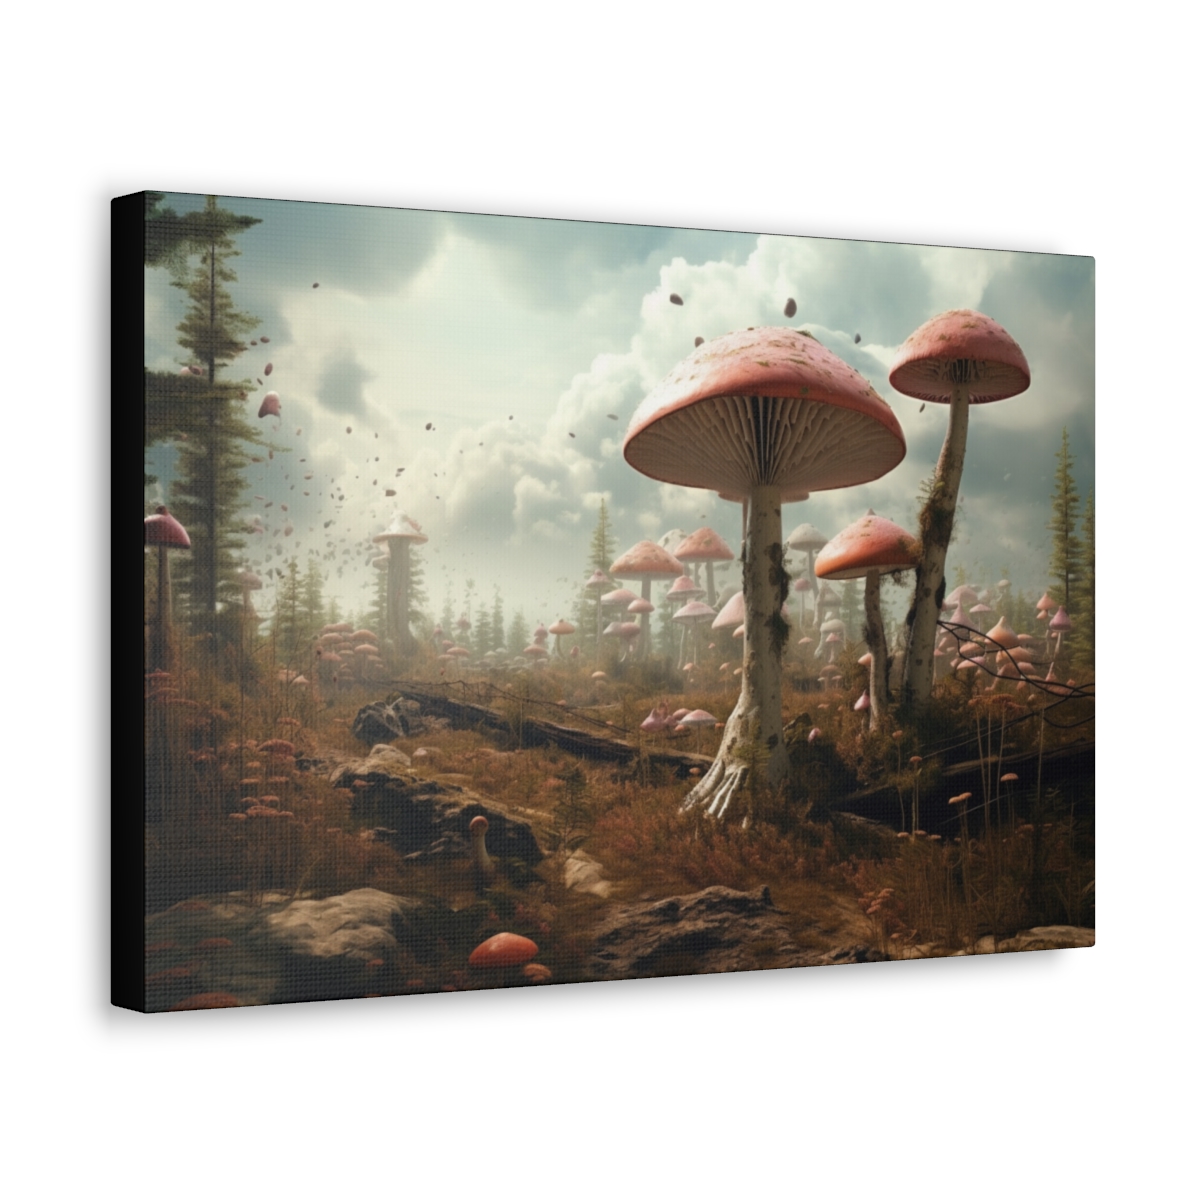 Mushroom Art Canvas Print: Shrooms From the Cottage